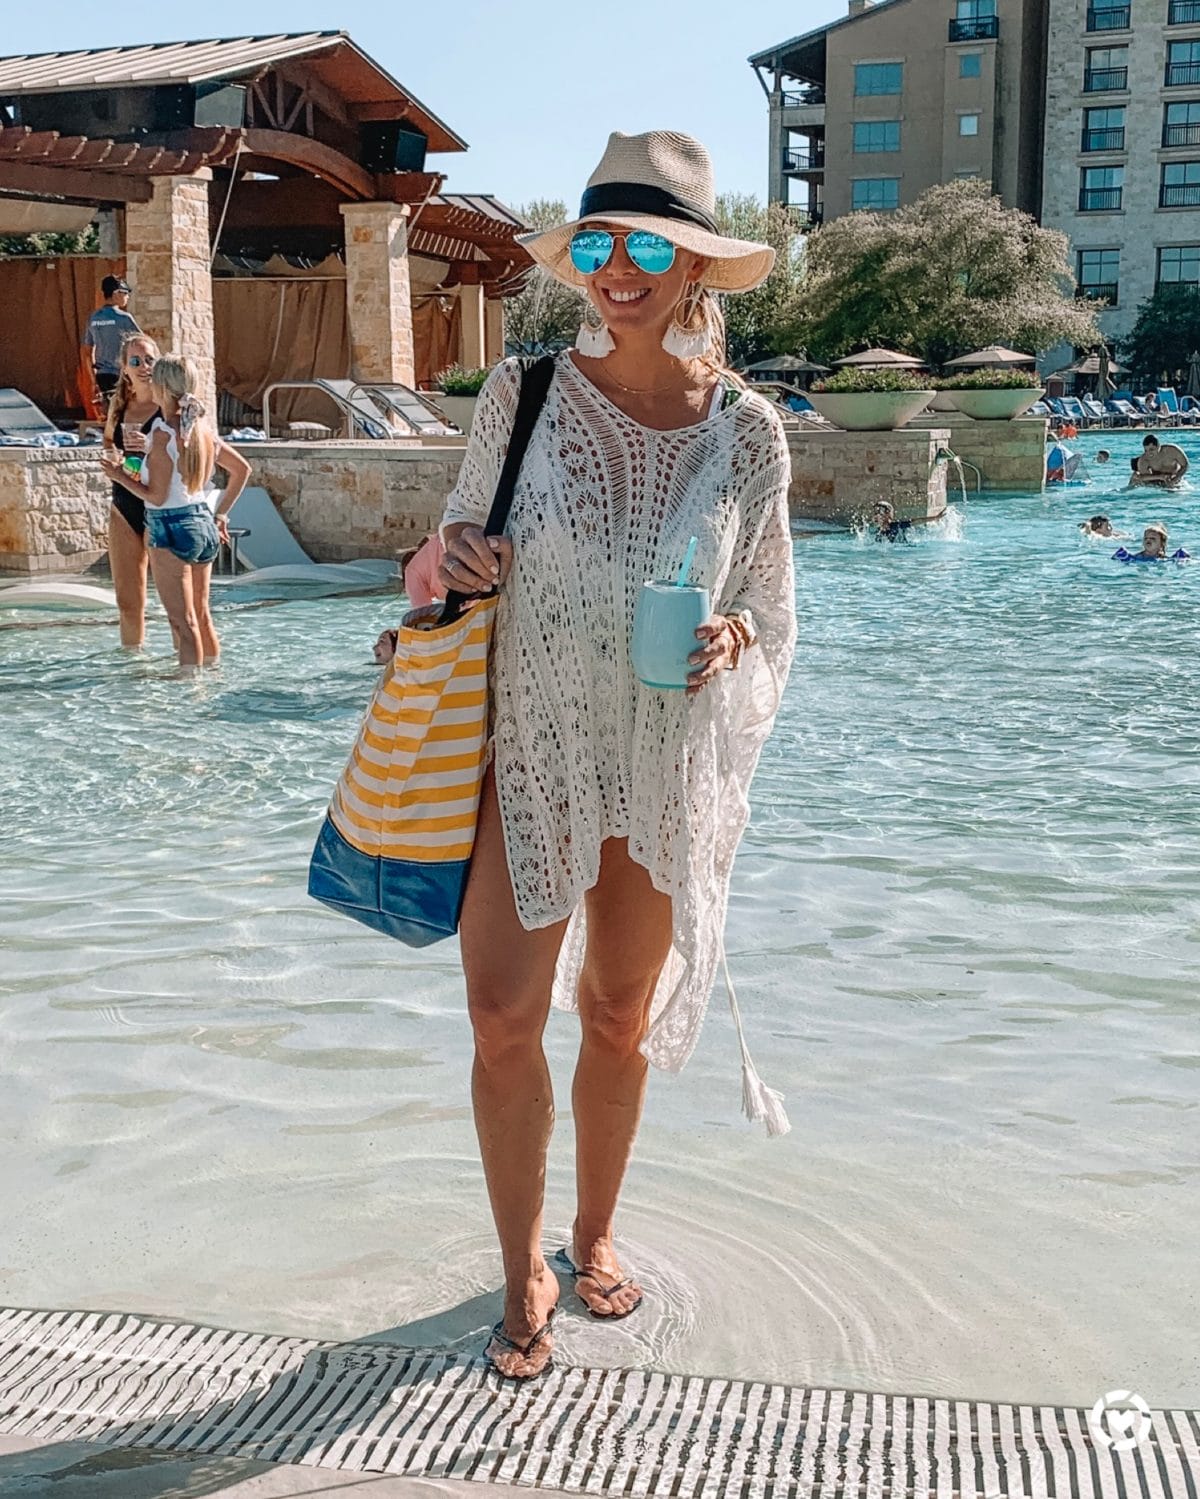 Amazon Fashion Prime Day Haul - Poolside outfit